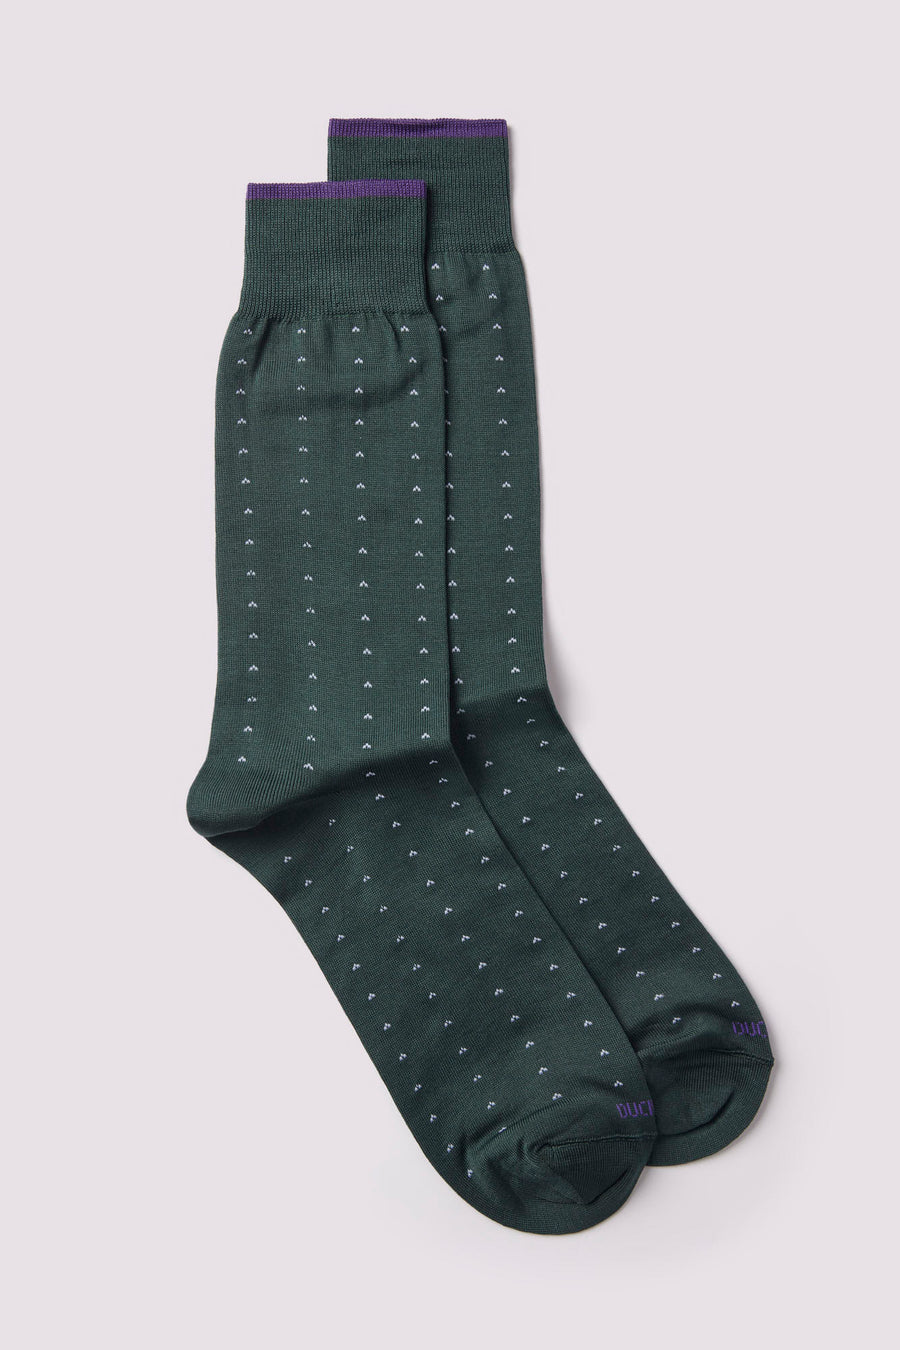 Dotted Socks in Rain Forest